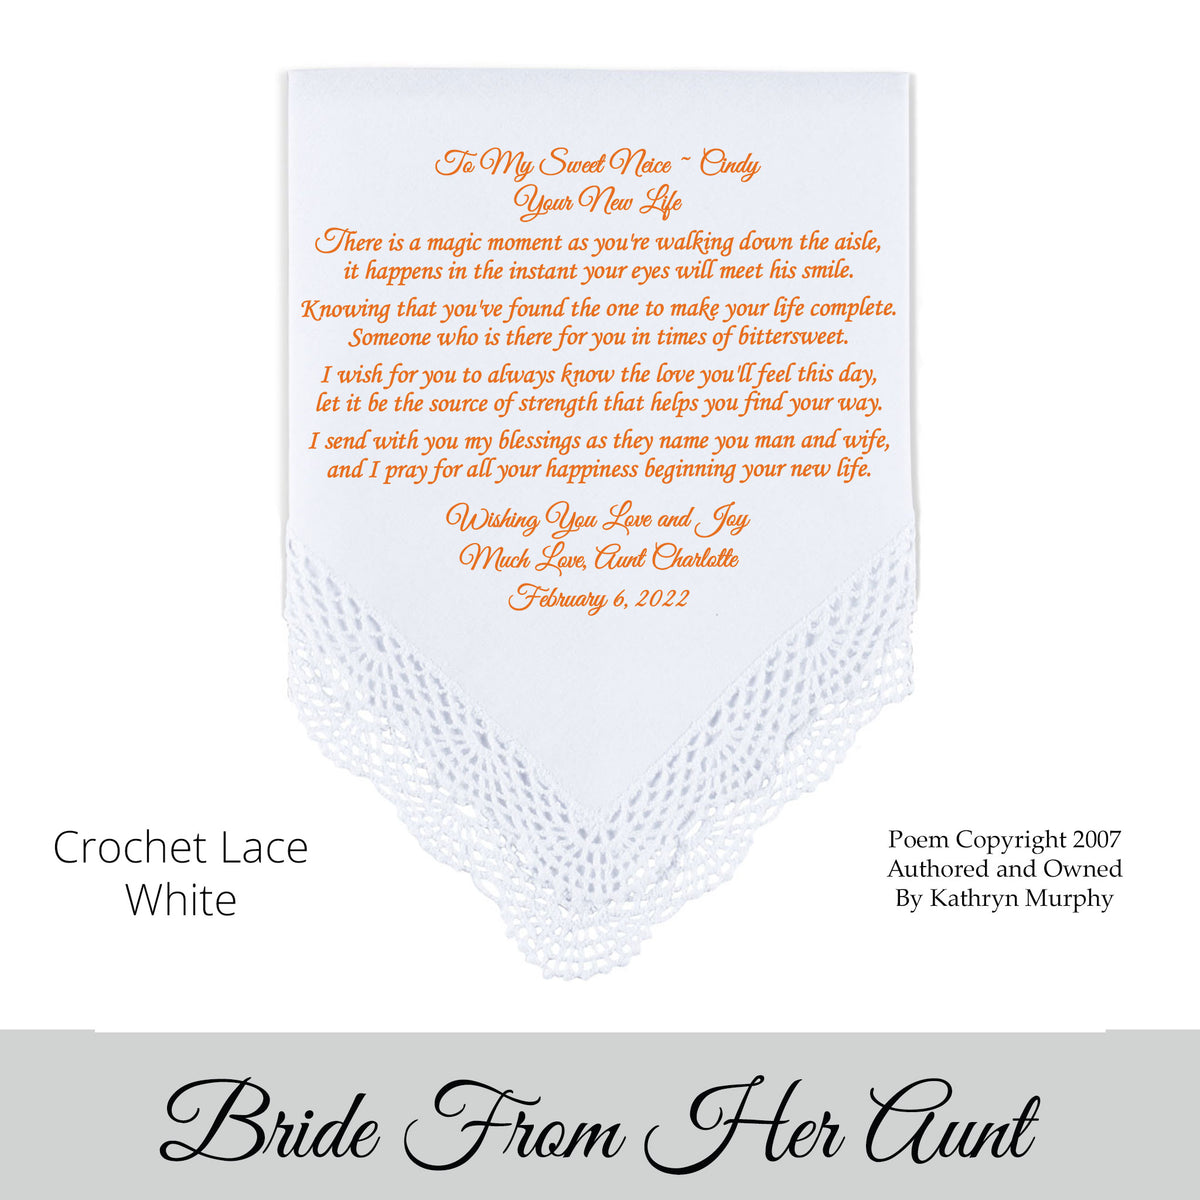 Wedding Hankie With Poem For the Bride From Her Aunt &quot;Your New Life&quot;